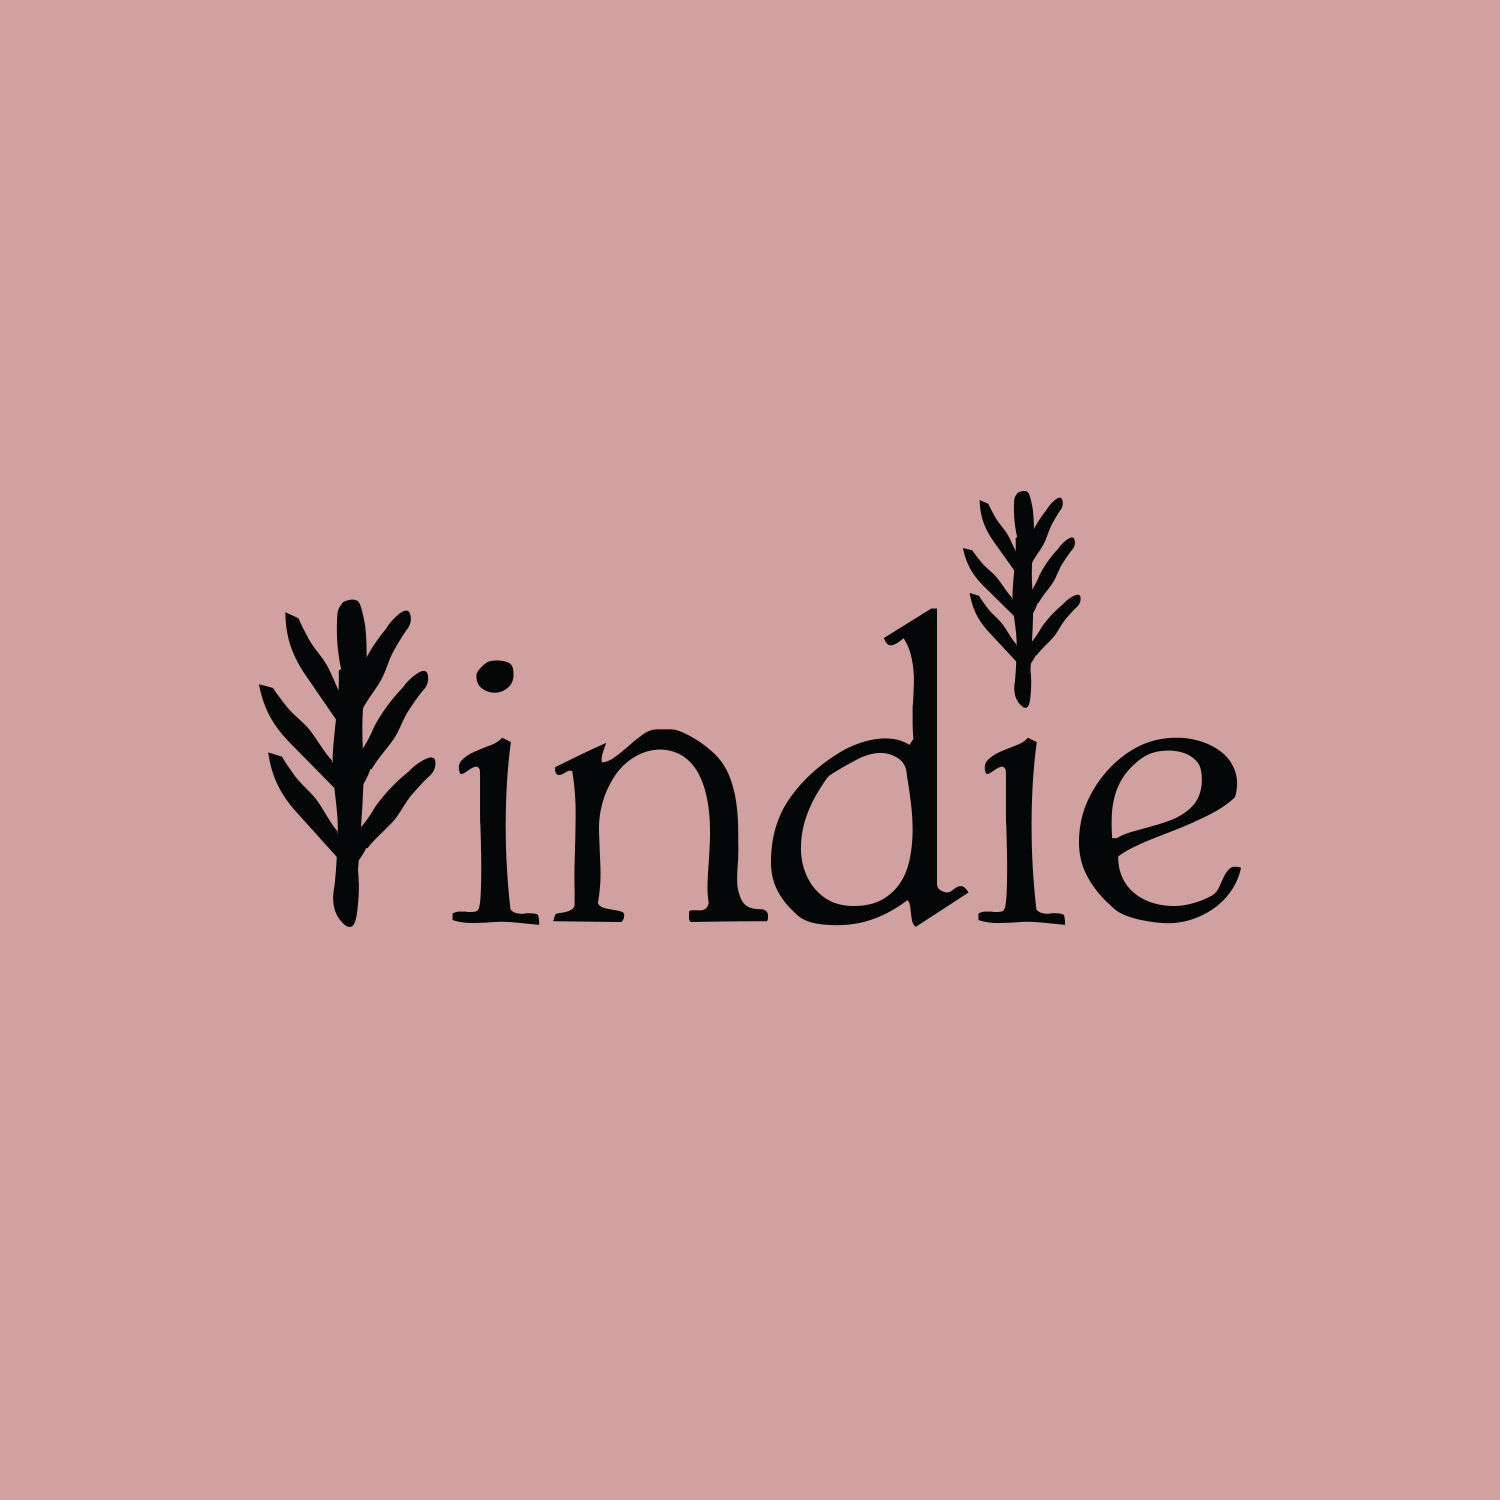 Indie is the ultimate showbag for independent, free-spirited girls. The Indie girl is a social butterfly who shops fast fashion and affordable beauty products. She shops mainly online and is influenced heavily by celebrities, influencers and her friends through social media.